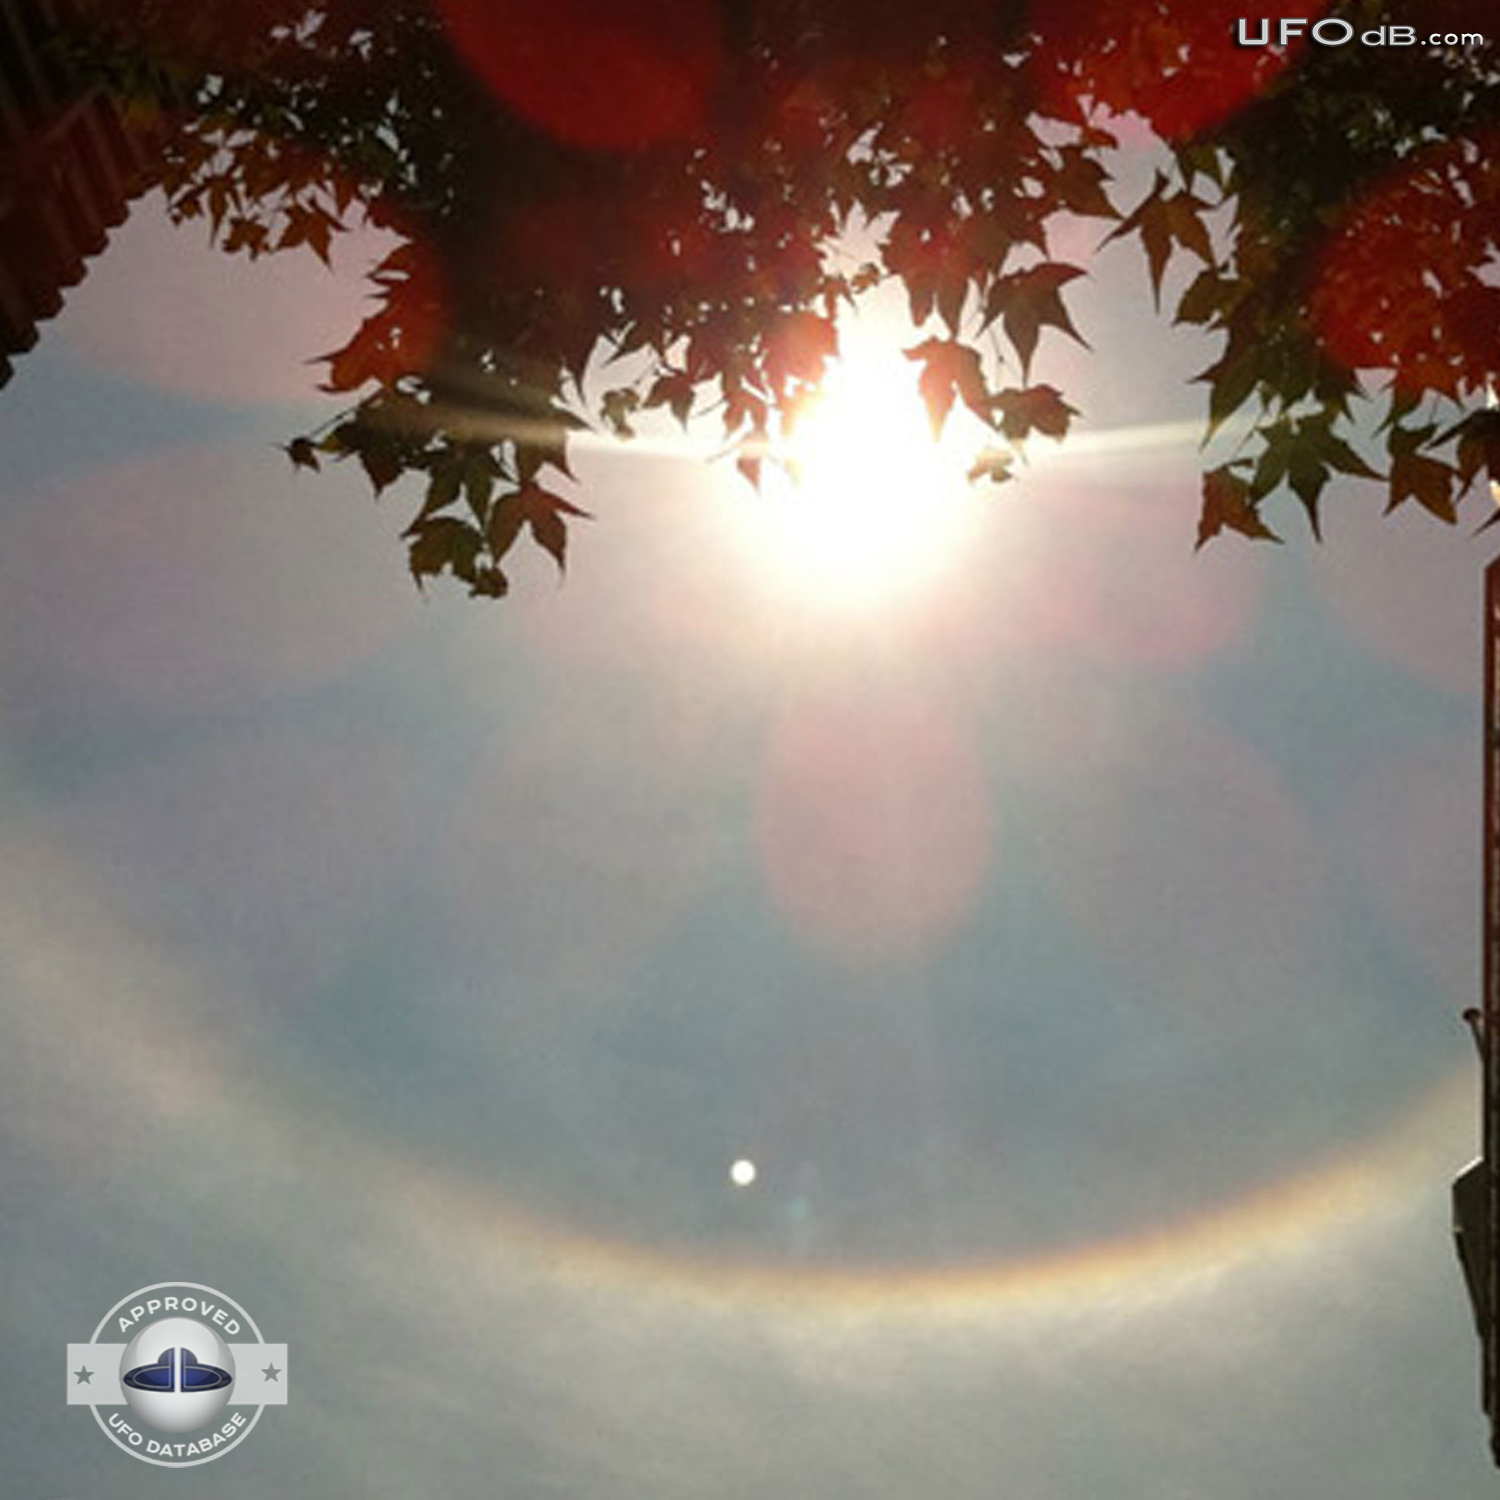 Huge halo around the sun with UFO moving near by in Johannesburg 2010 UFO Picture #348-1